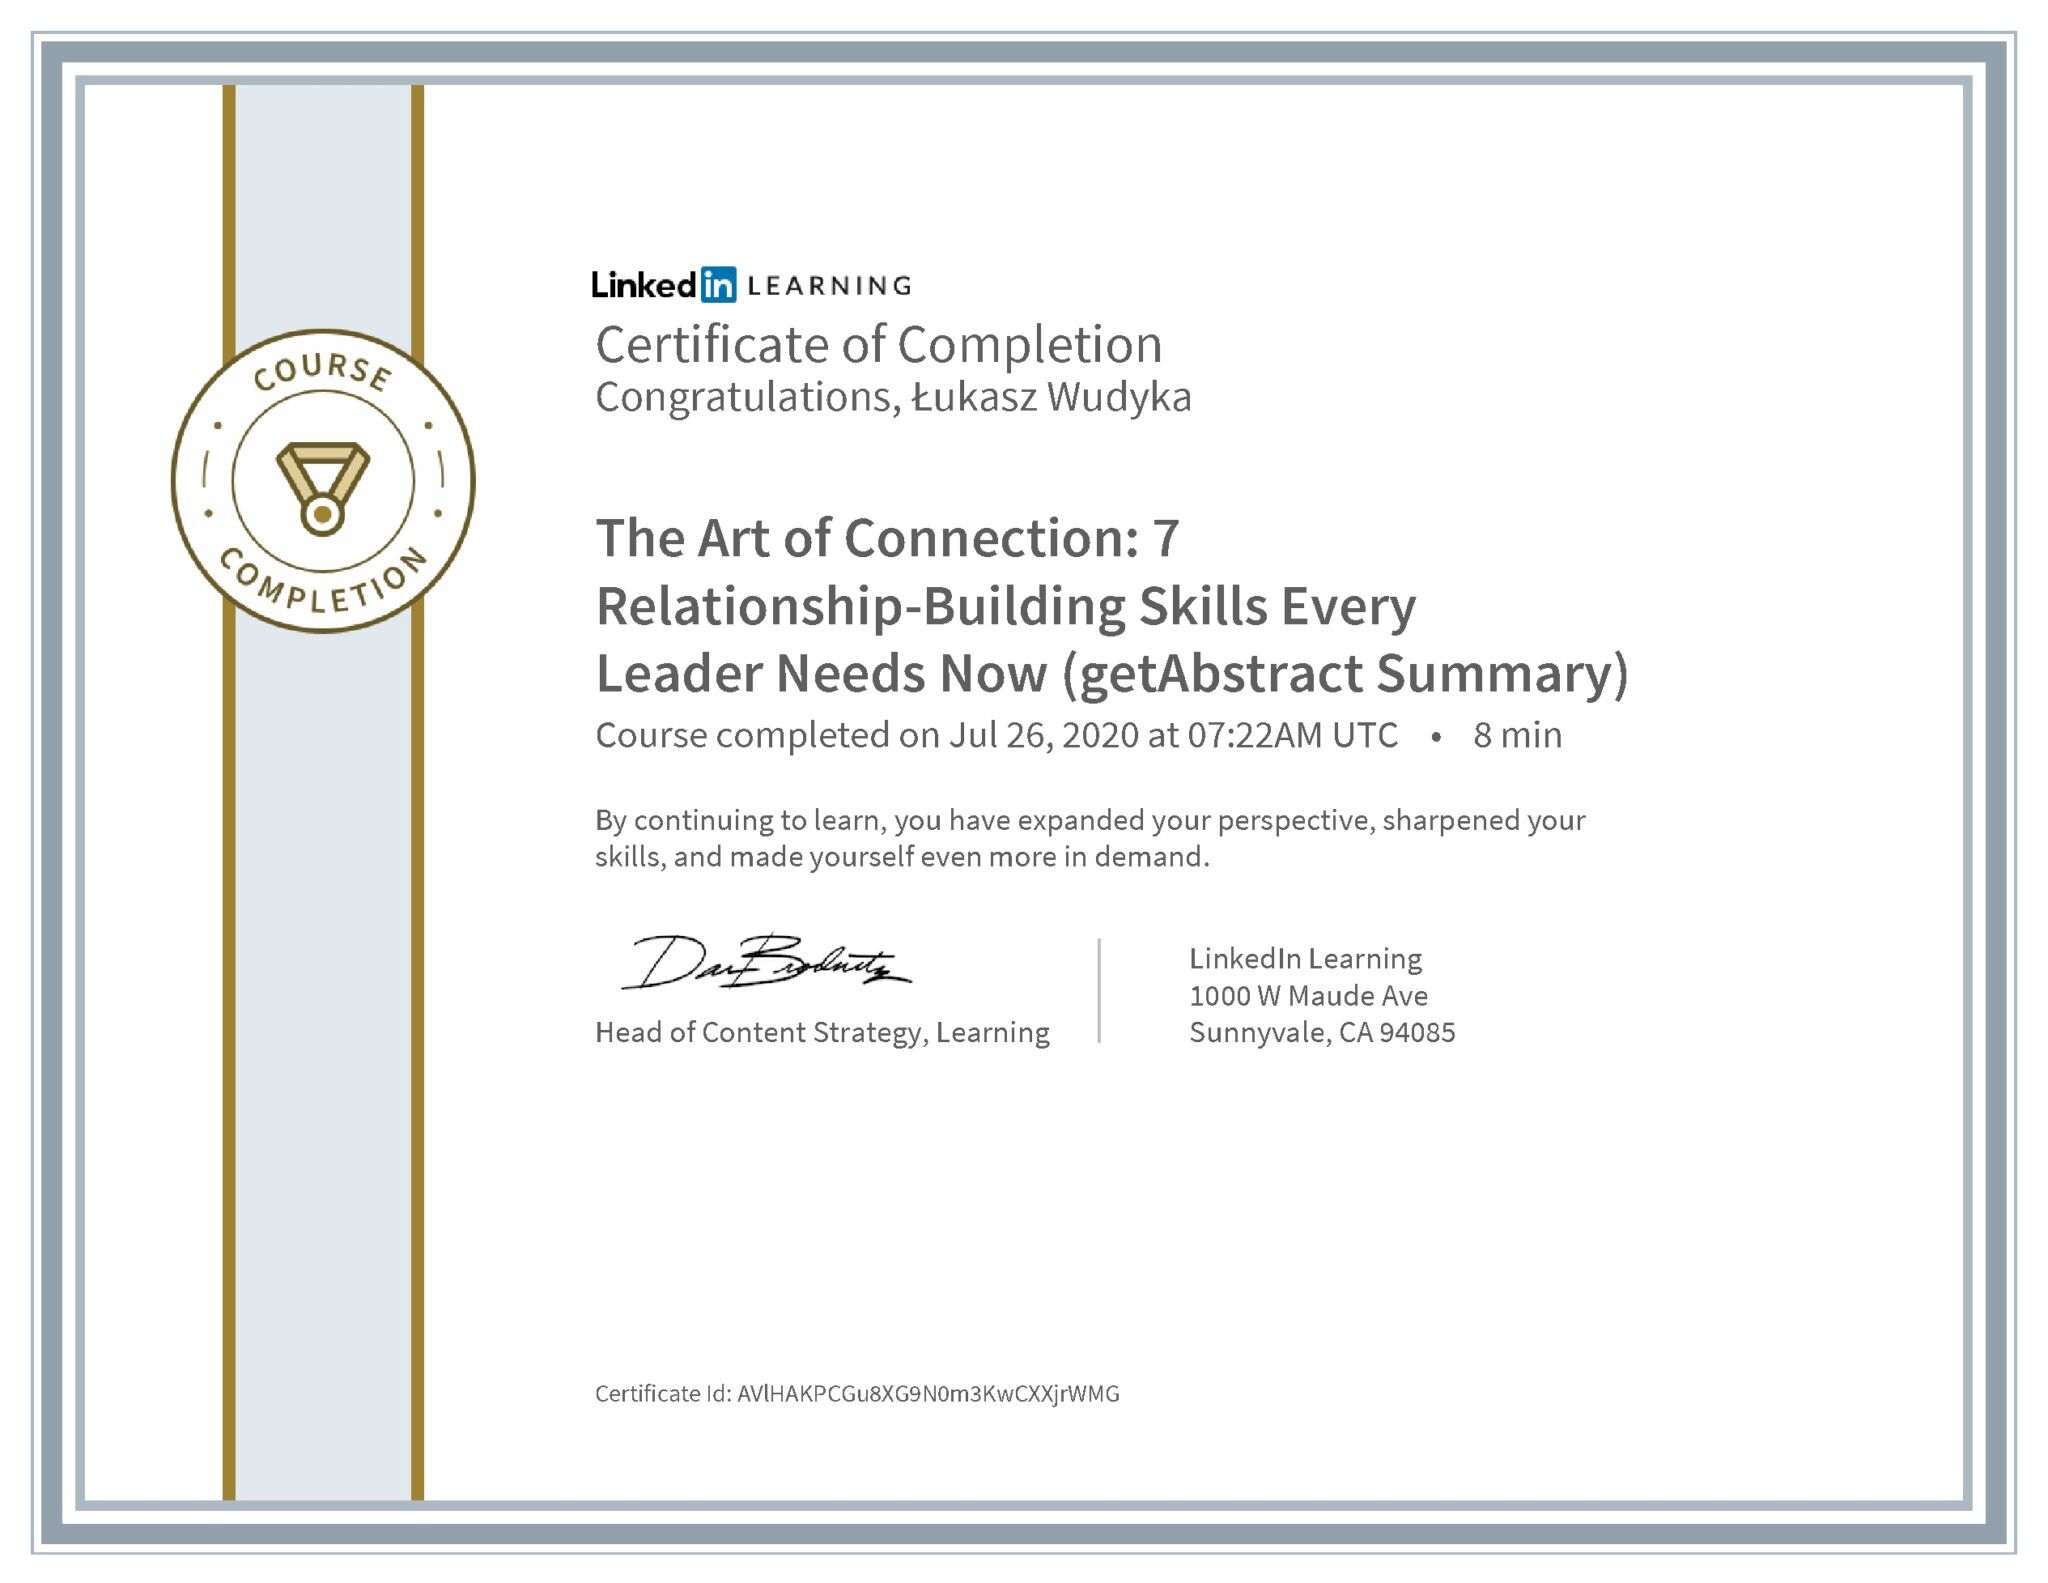 Łukasz Wudyka certyfikat LinkedIn The Art of Connection: 7 Relationship-Building Skills Every Leader Needs Now (getAbstract Summary)